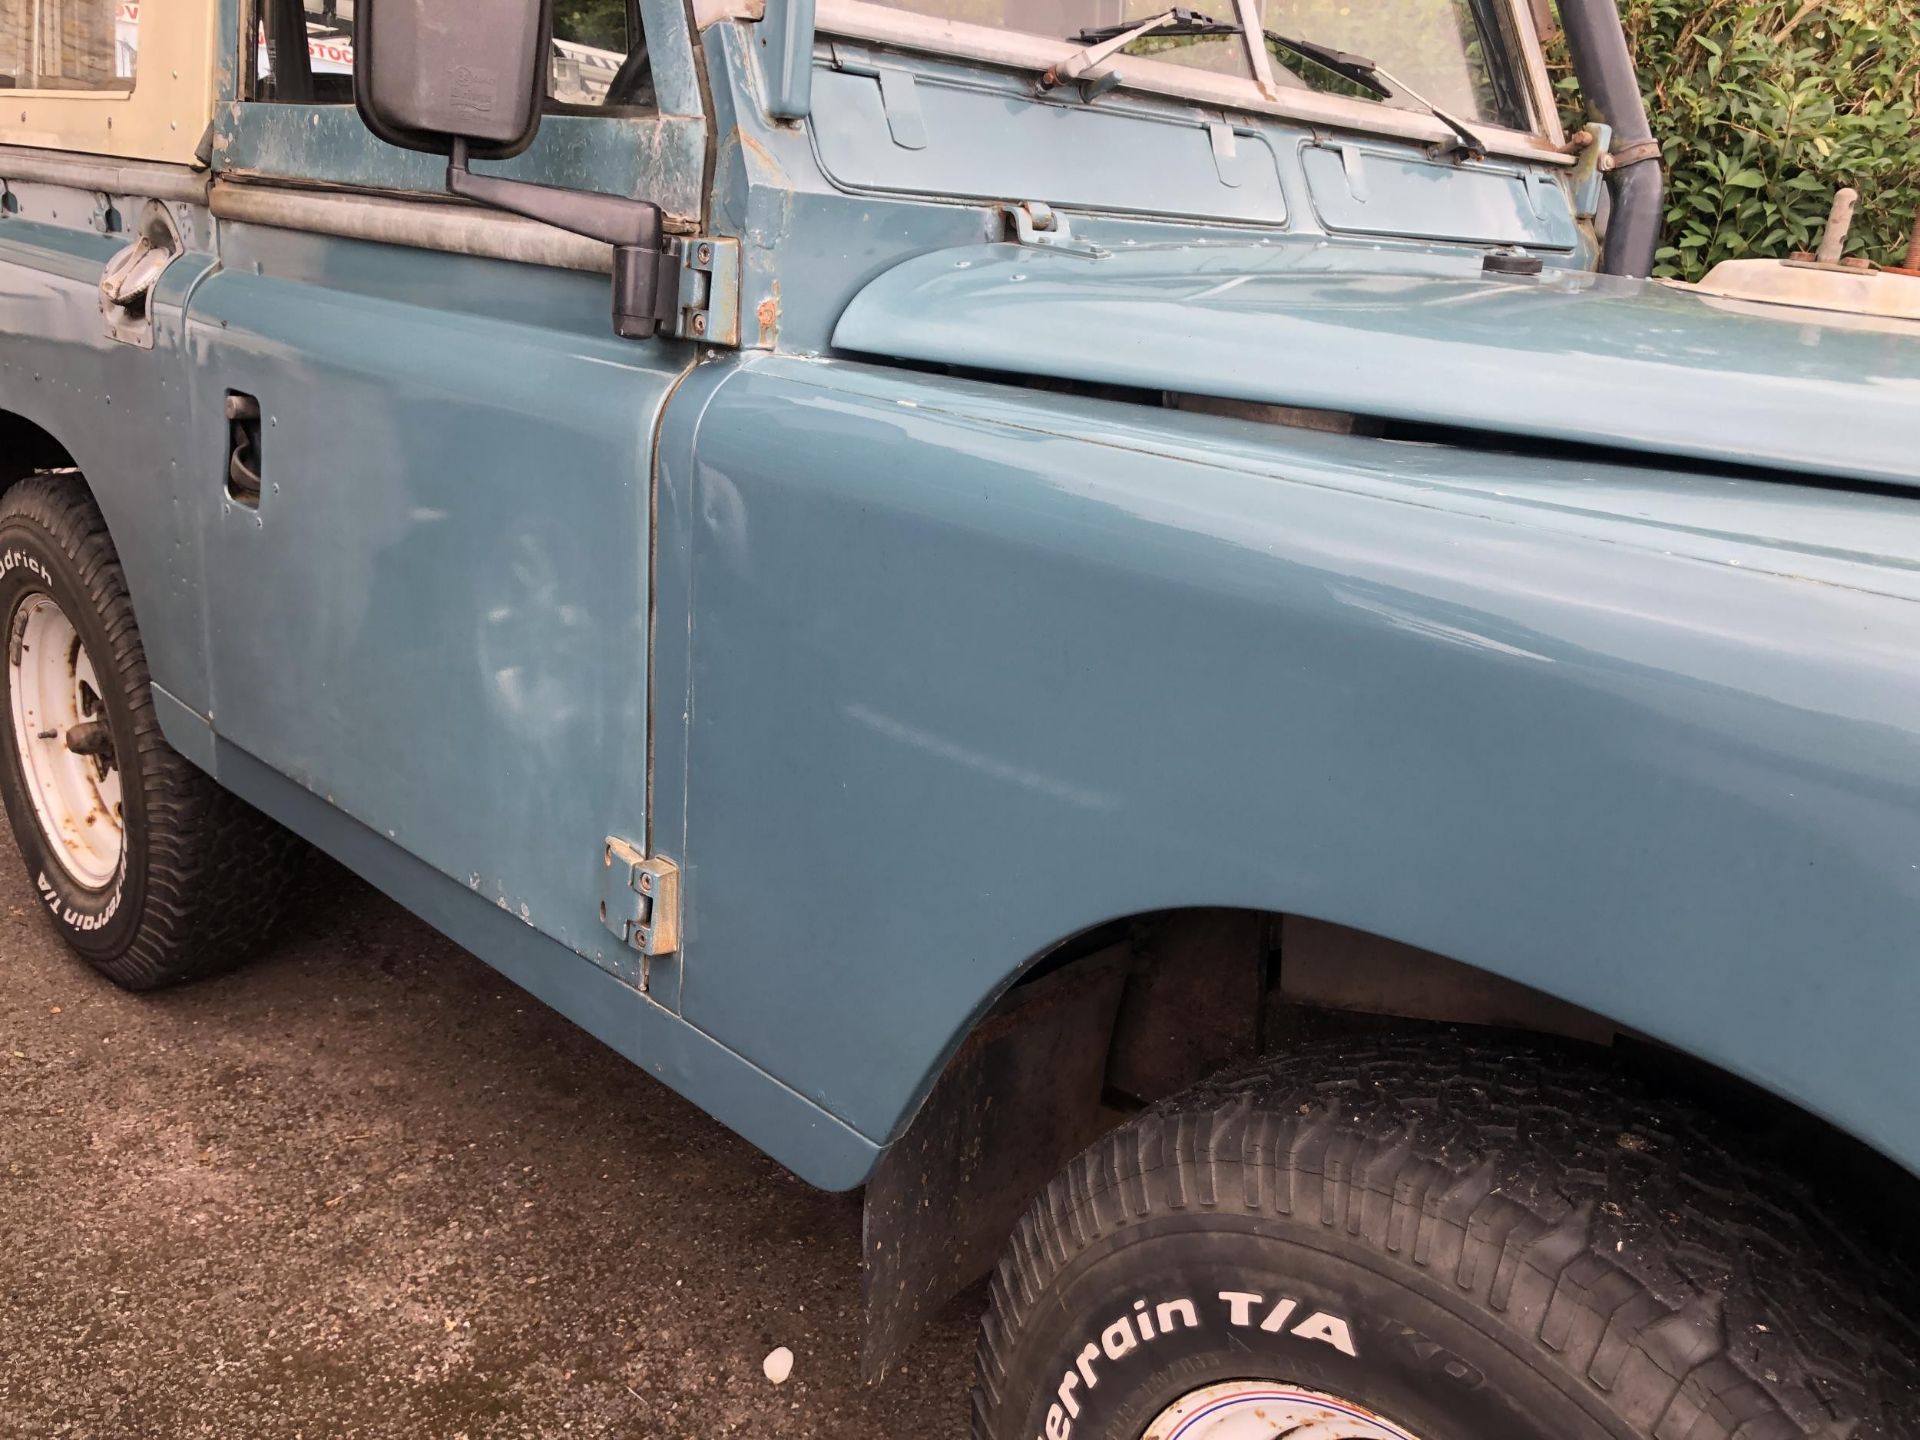 1981 Land Rover 88 inch Series III Registration number KAN 404W Blue with a white roof 2,286 cc - Image 19 of 51